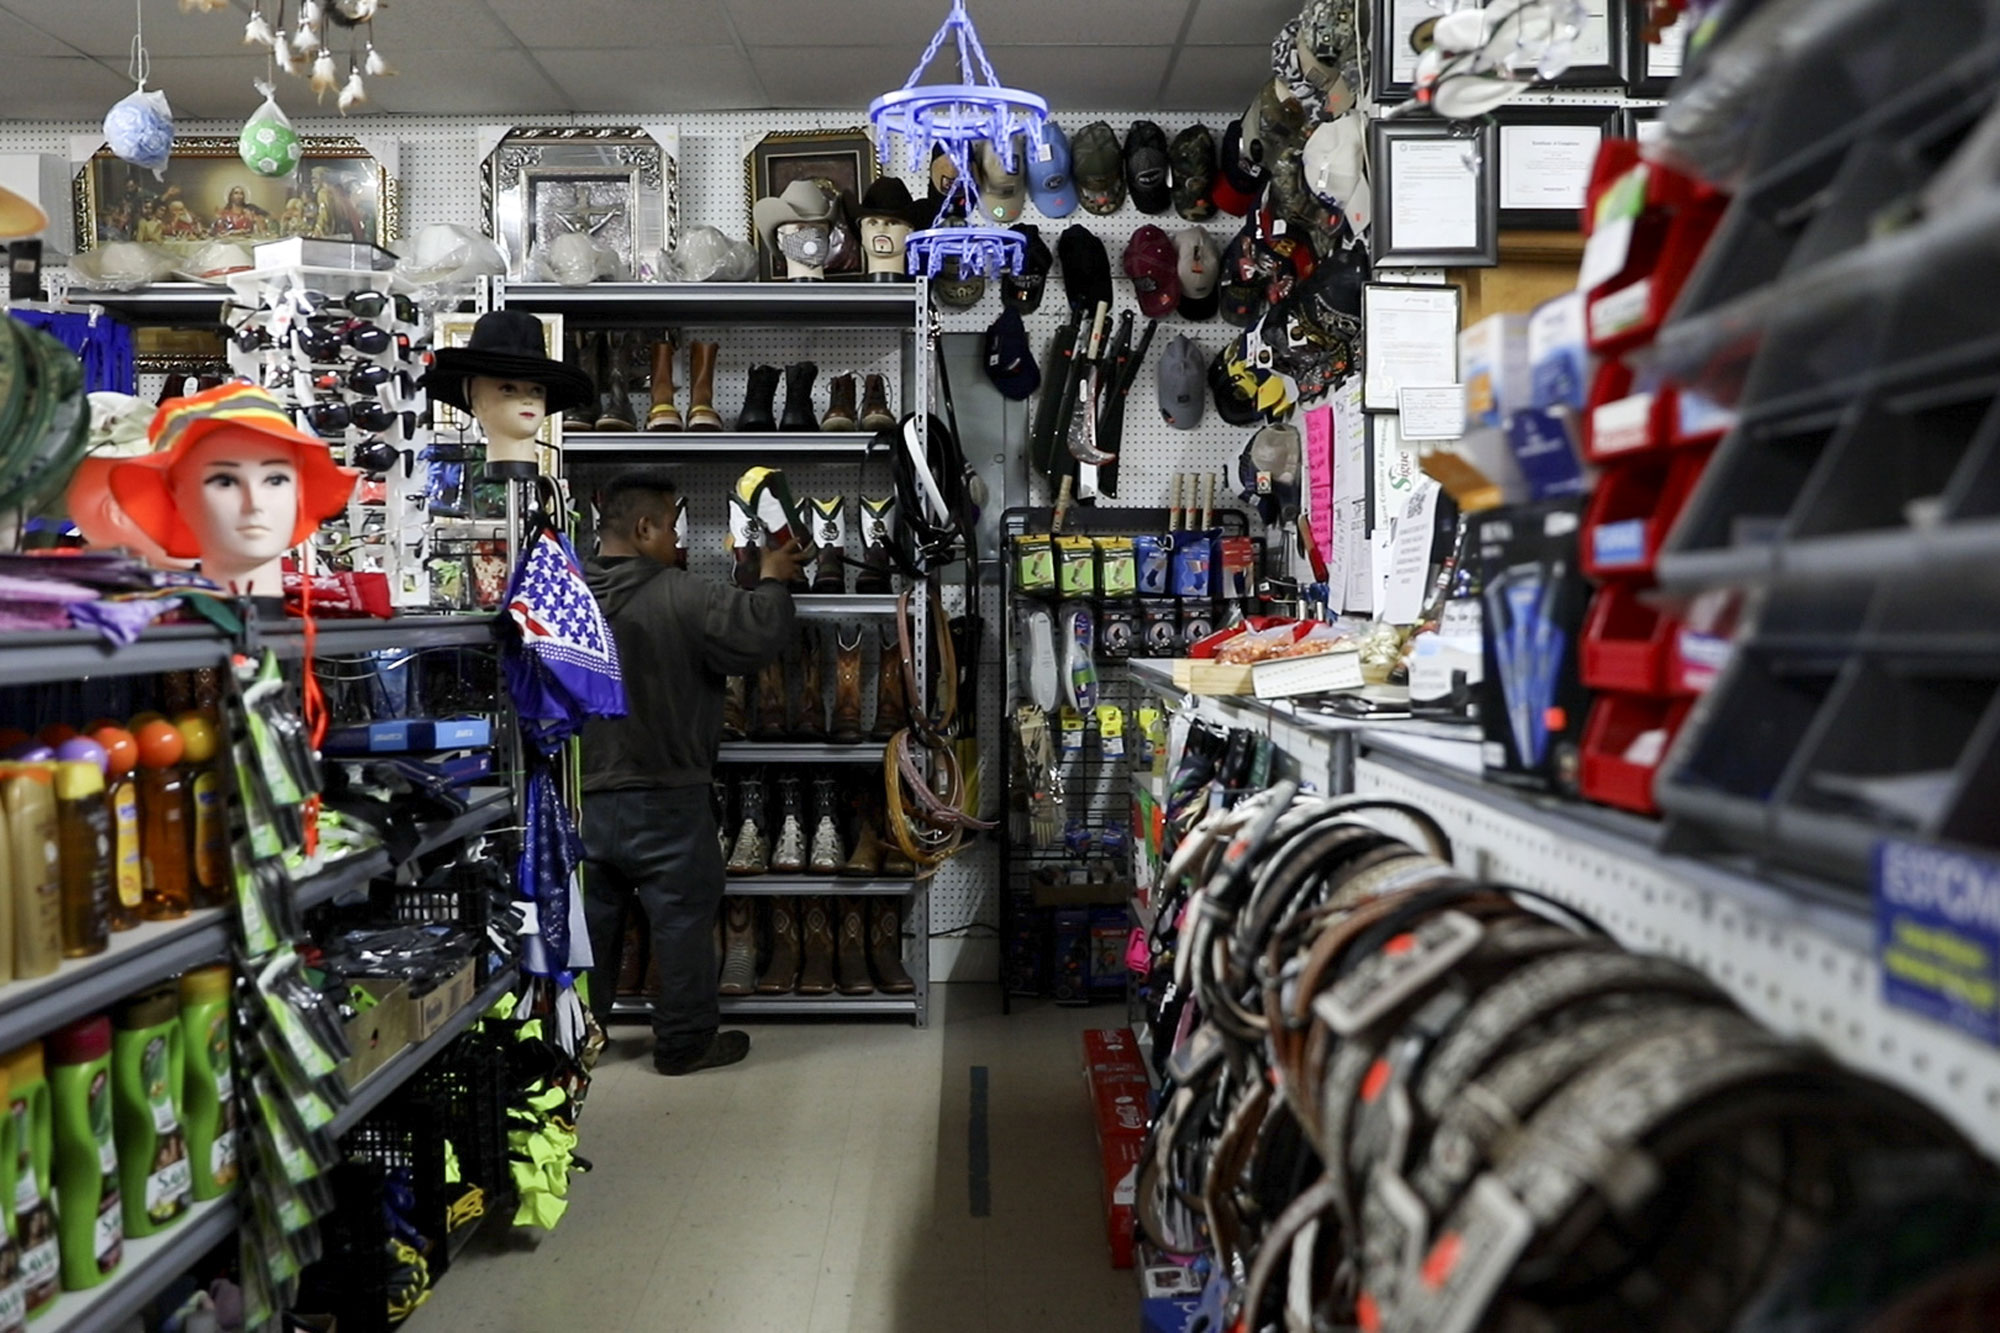 A man stands in the background of a supply shop with hats, boots, and belts